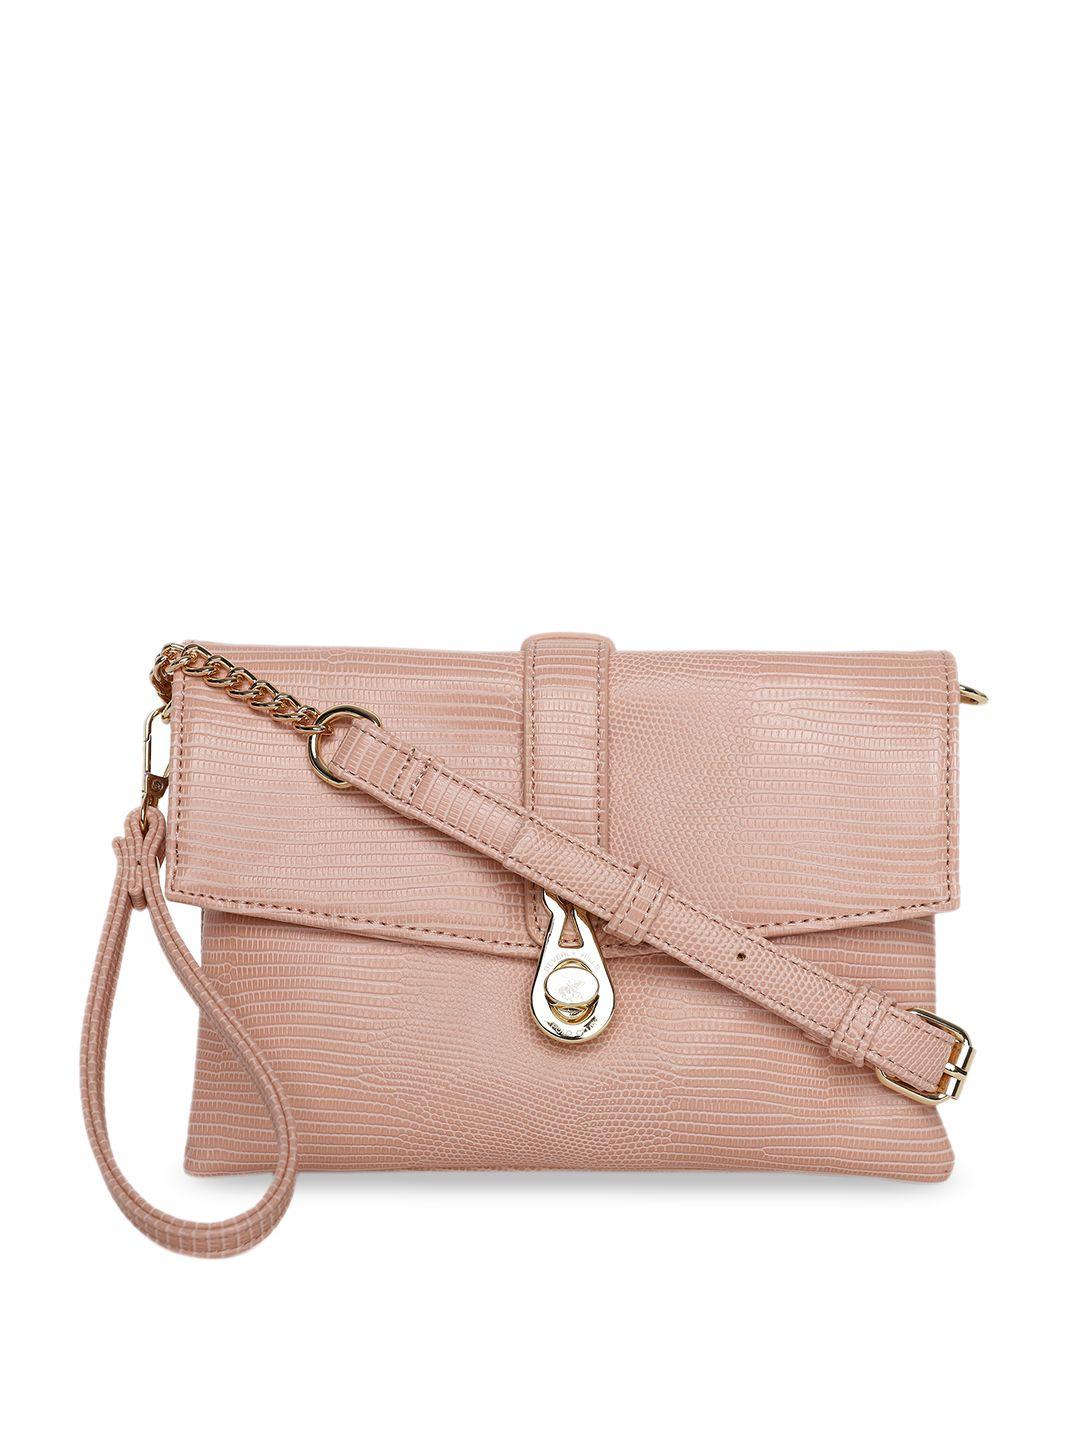 beverly hills polo club pink textured pu structured sling bag